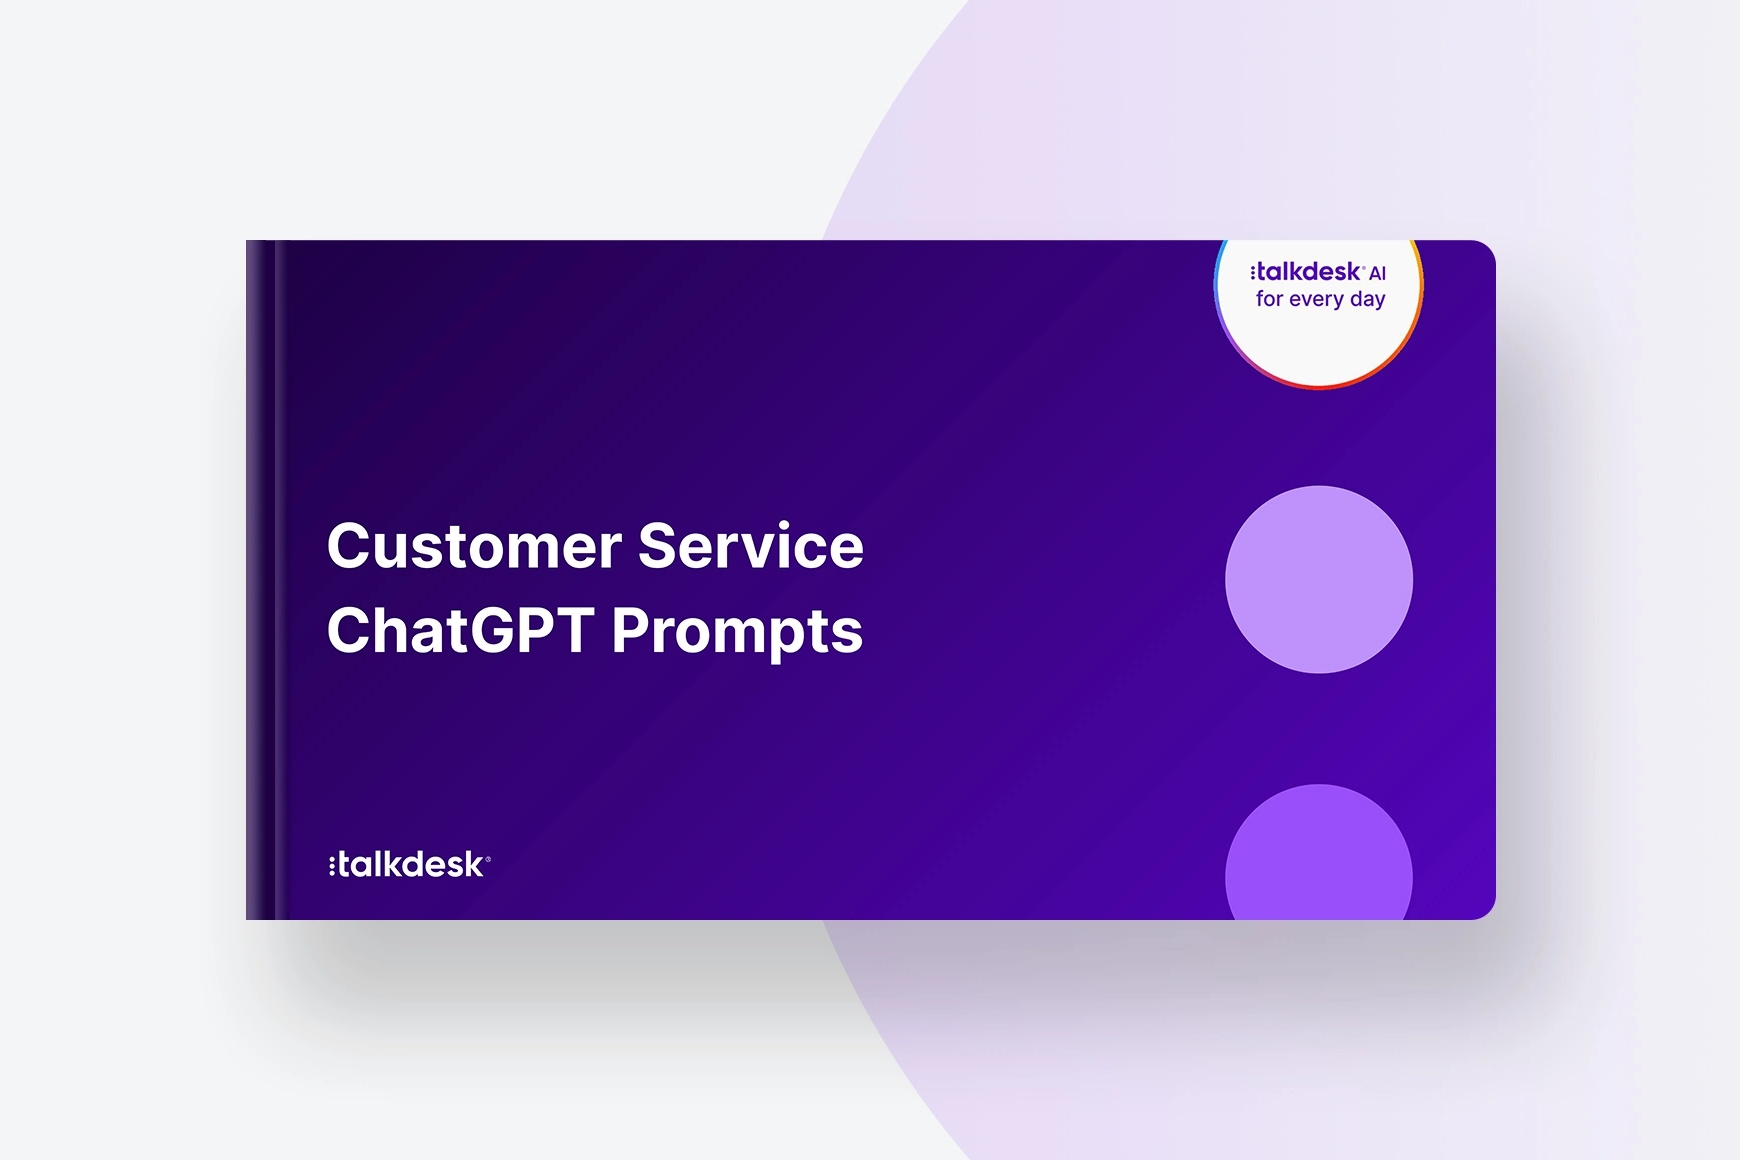 ChatGPT Prompts for Retail Customer Service Leaders